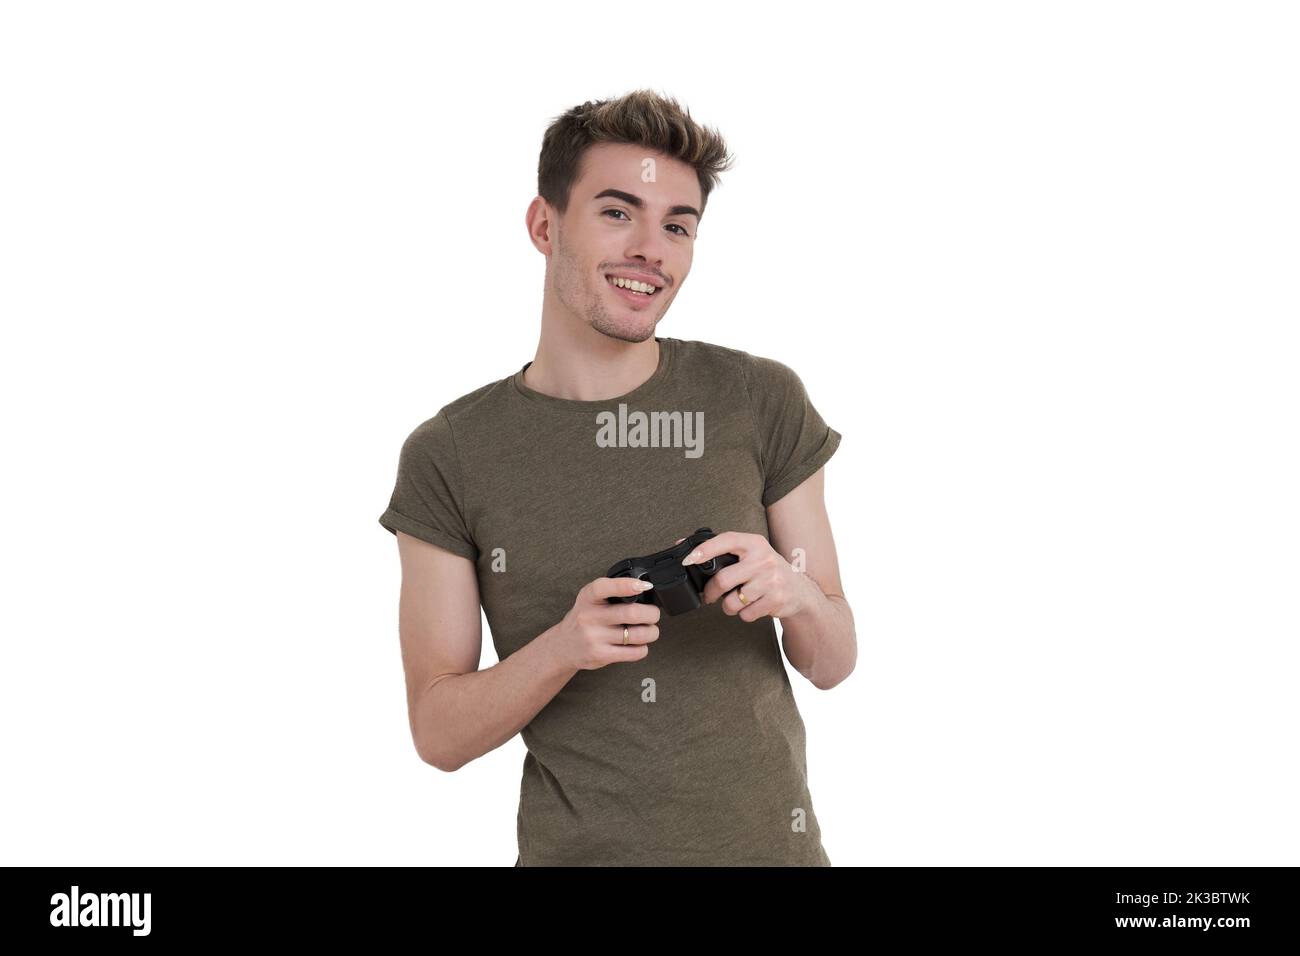 Young caucasian man smiling with a joystick, isolated. Stock Photo